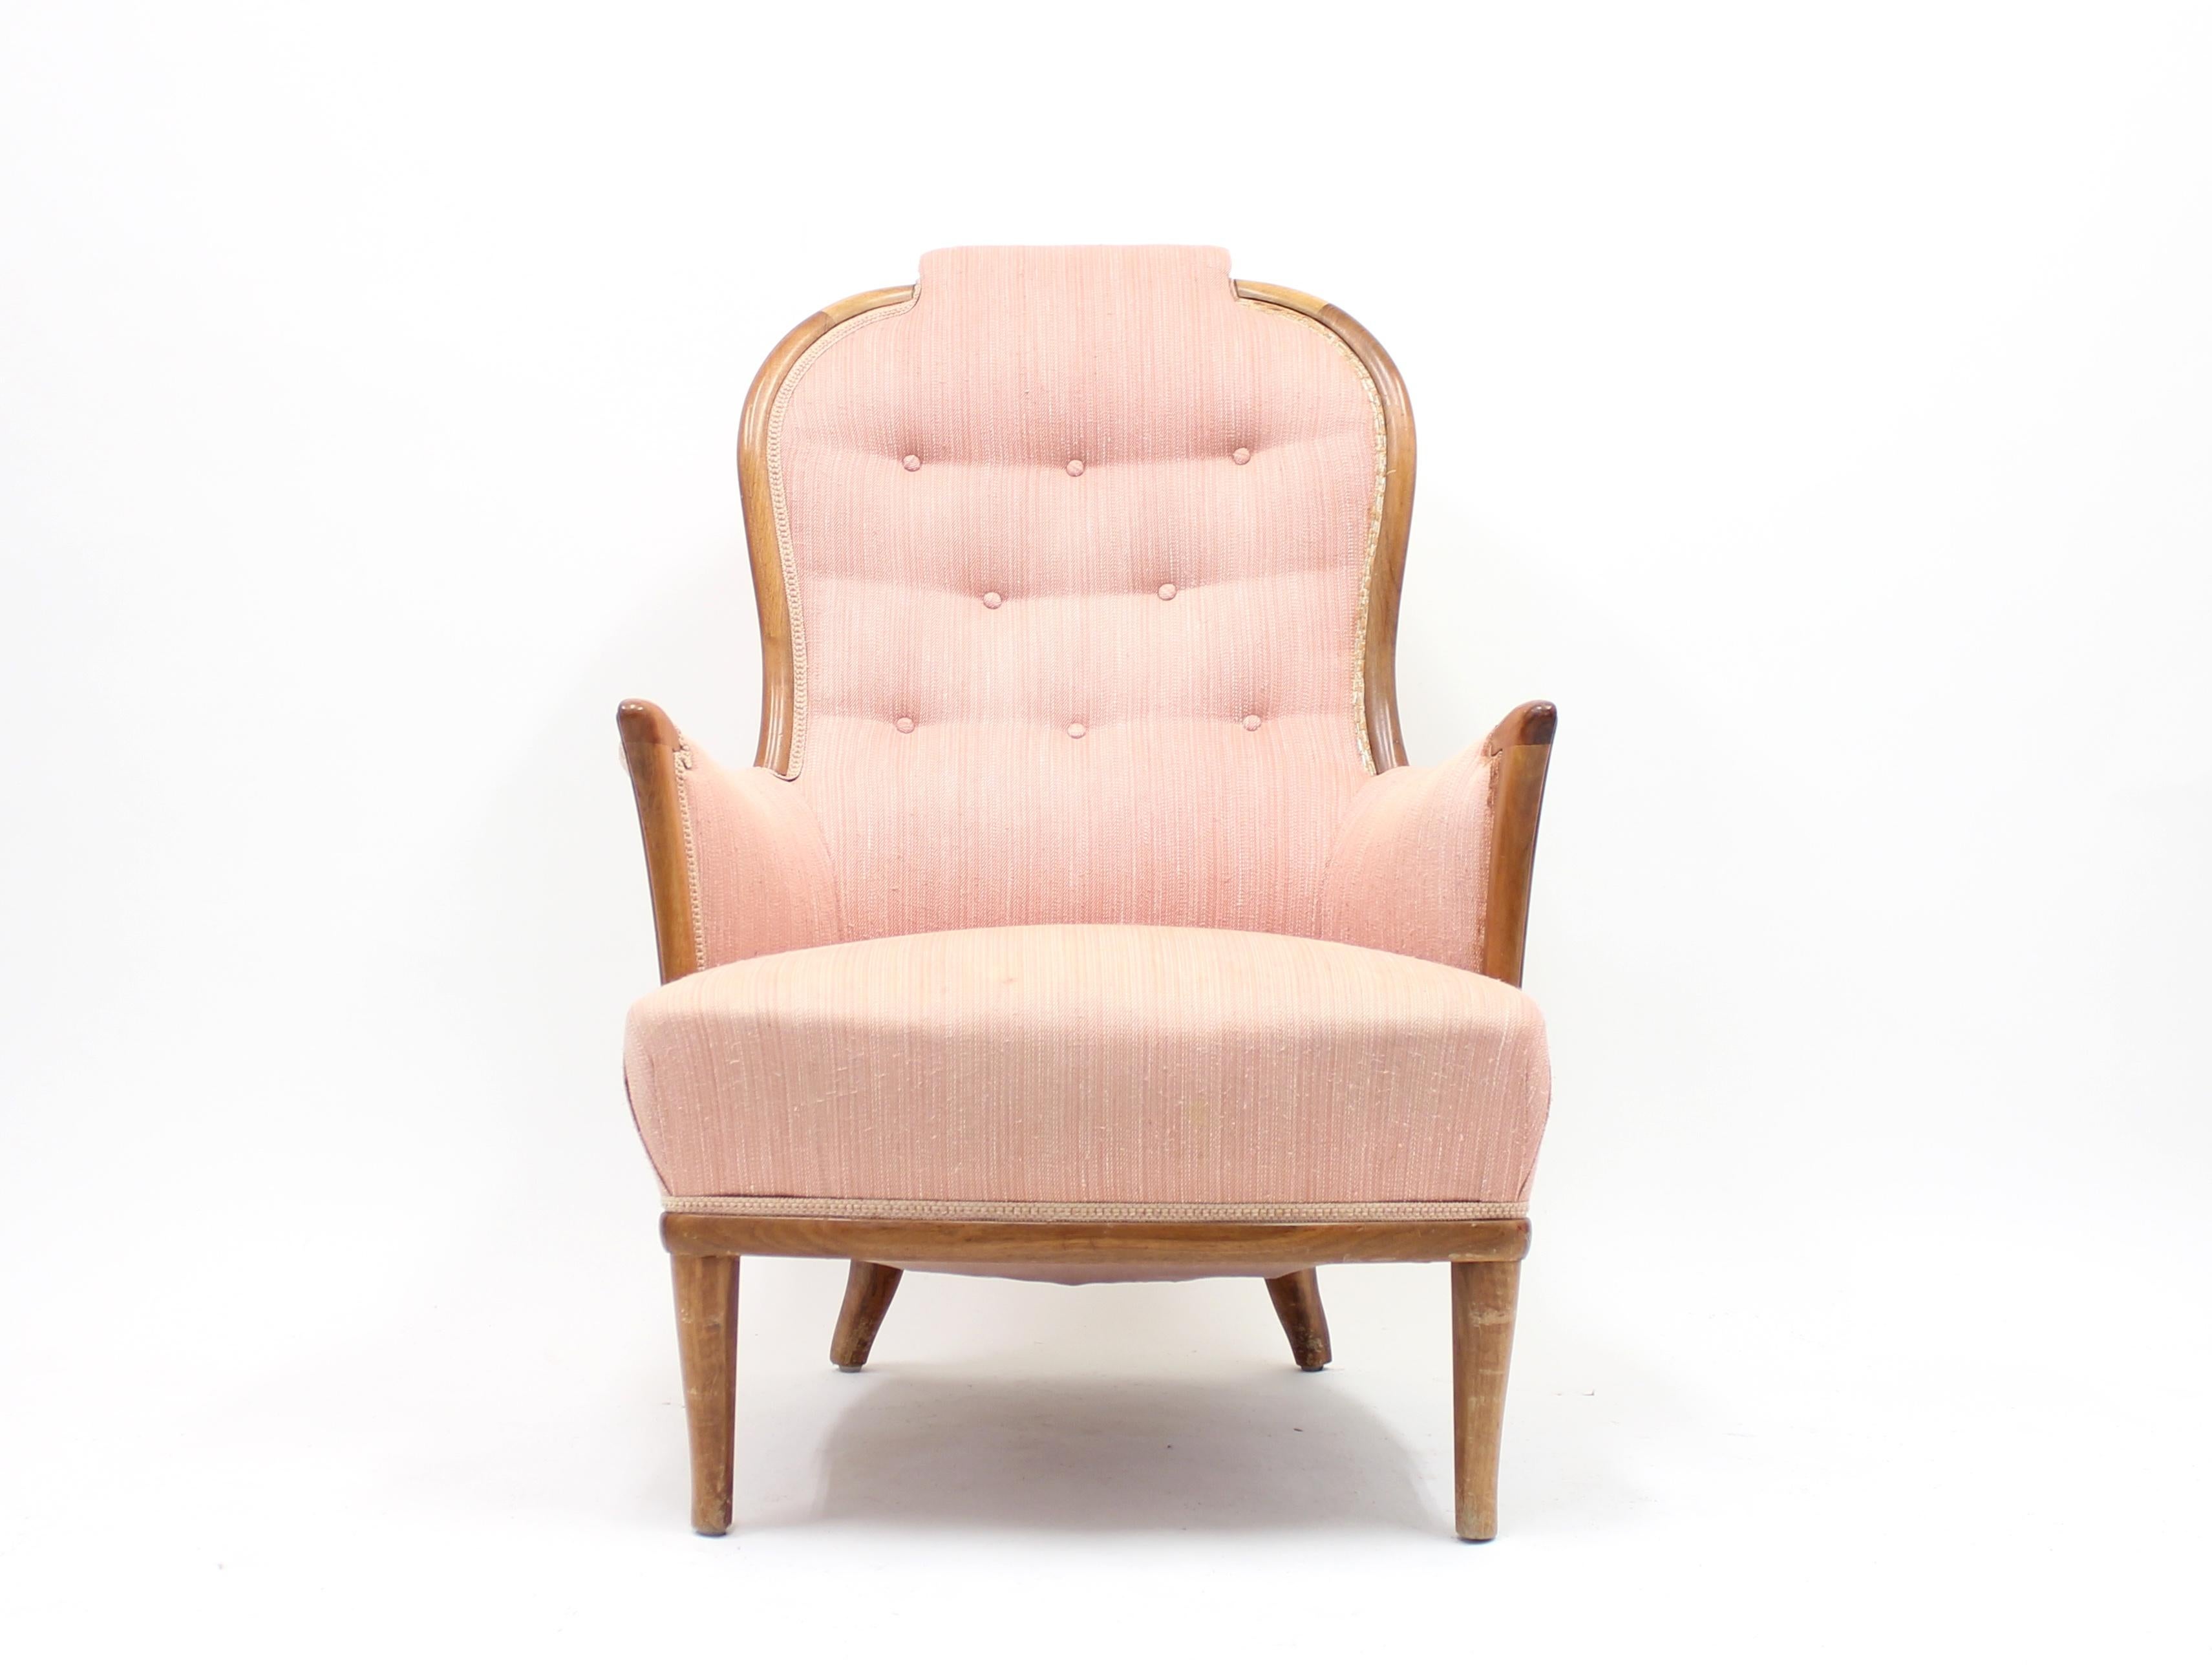 Lounge chair model Vår Fru (meaning our wife) designed by Carl Malmsten for Bodafors. The model was designed in 1961 and was originally made by Bodafors but later on O.H. Sjögren took over the production. Frame made of mahogany with original pink